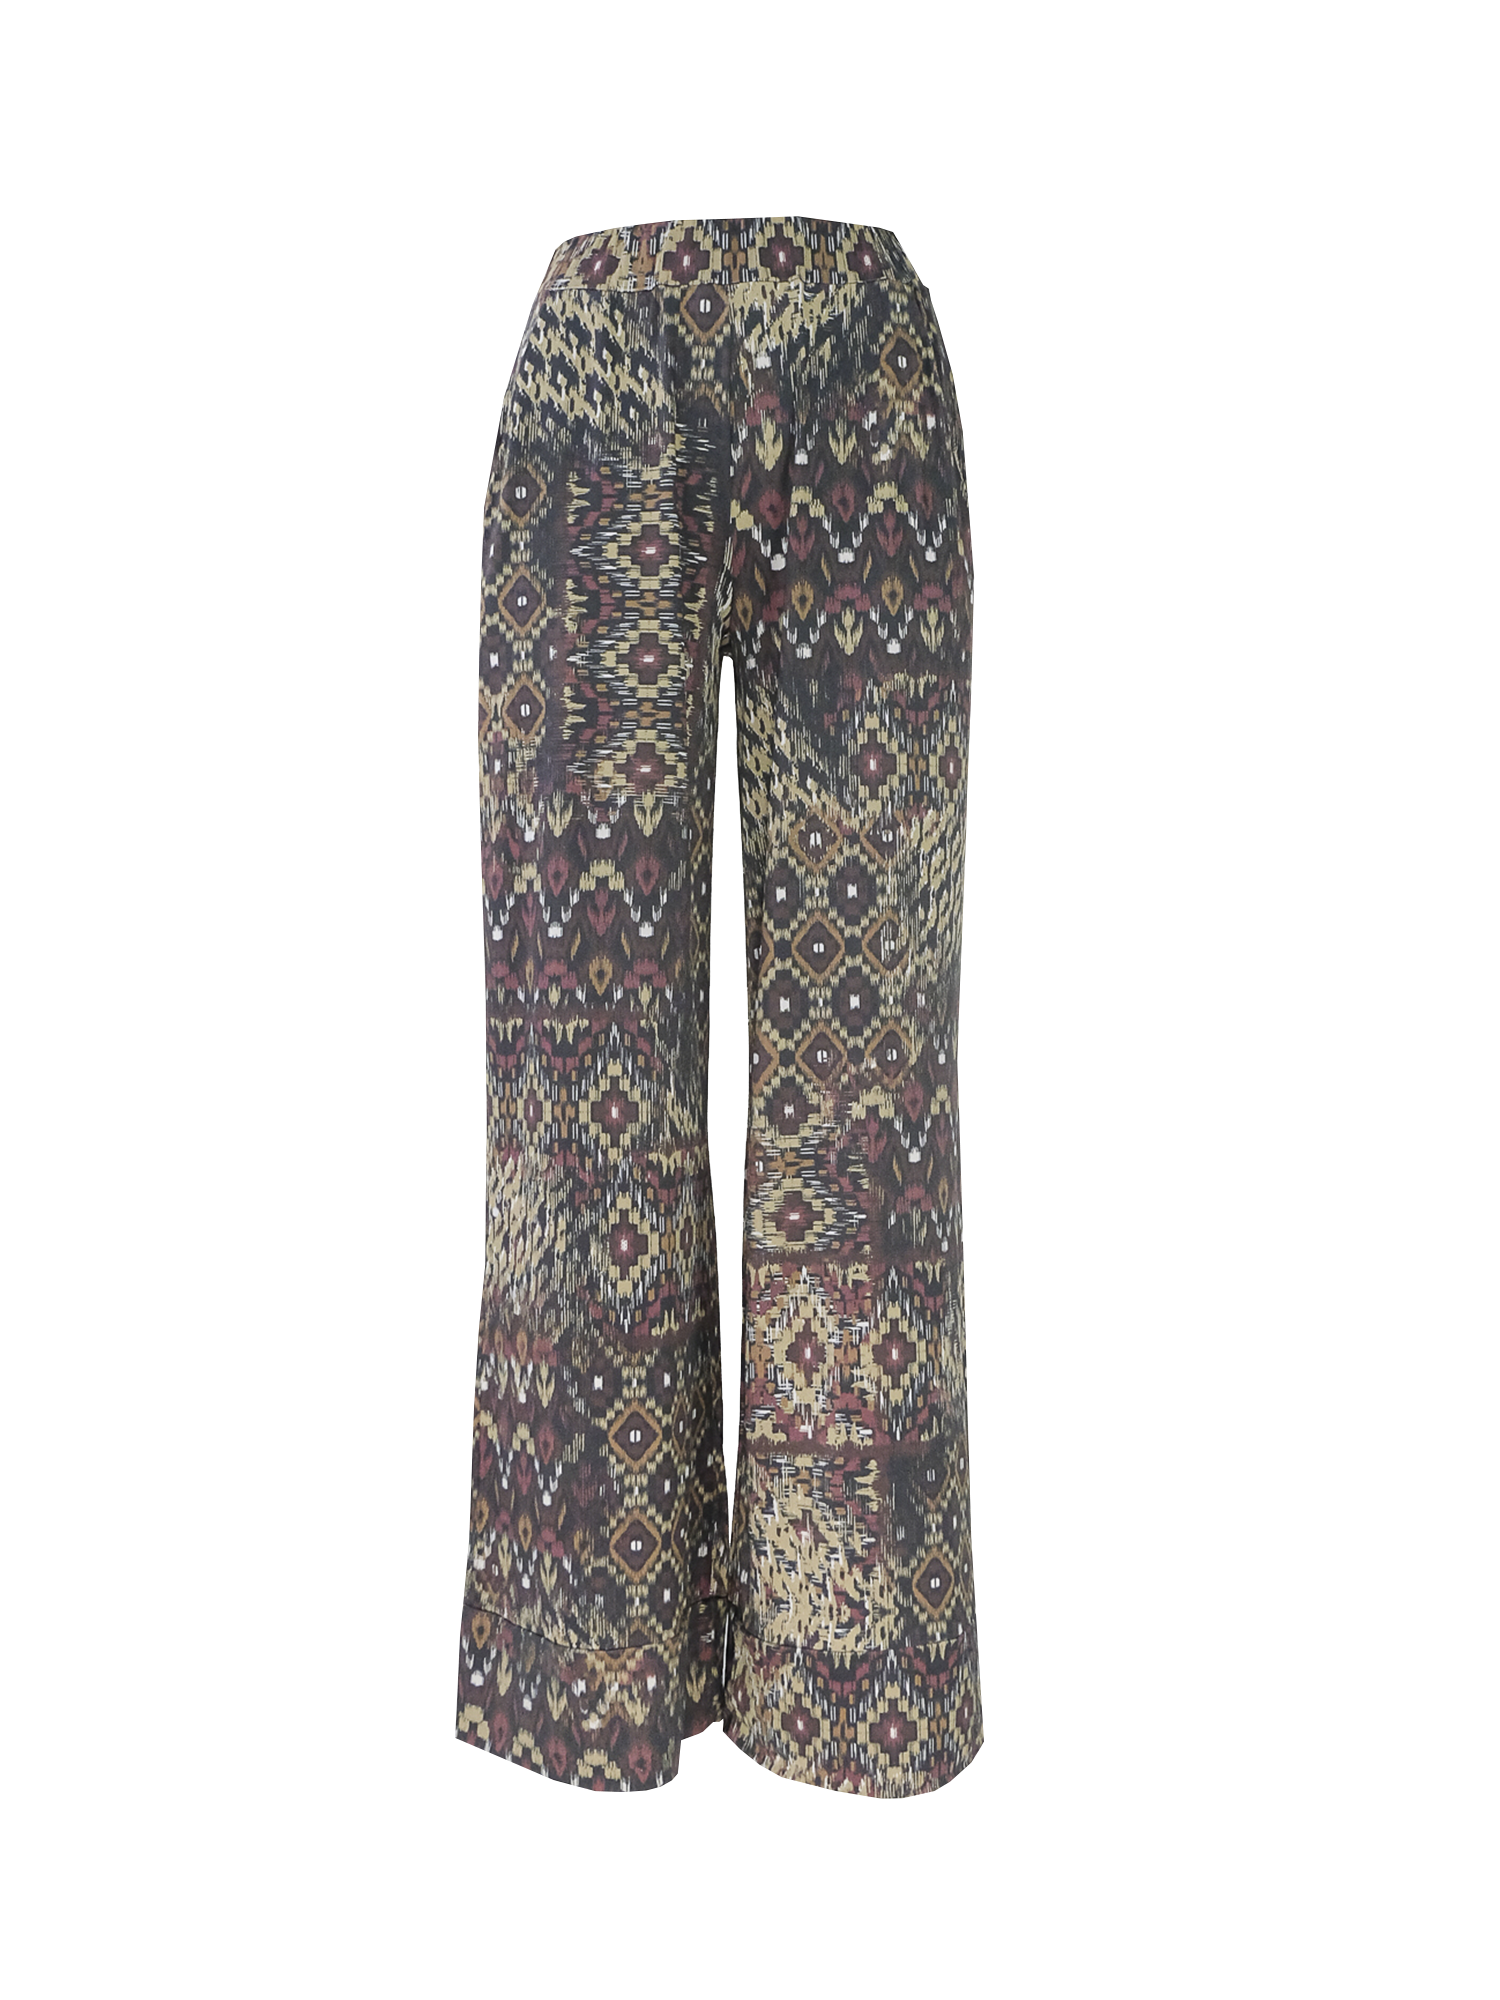 AIDA - palazzo trousers with side pockets in earth lycra